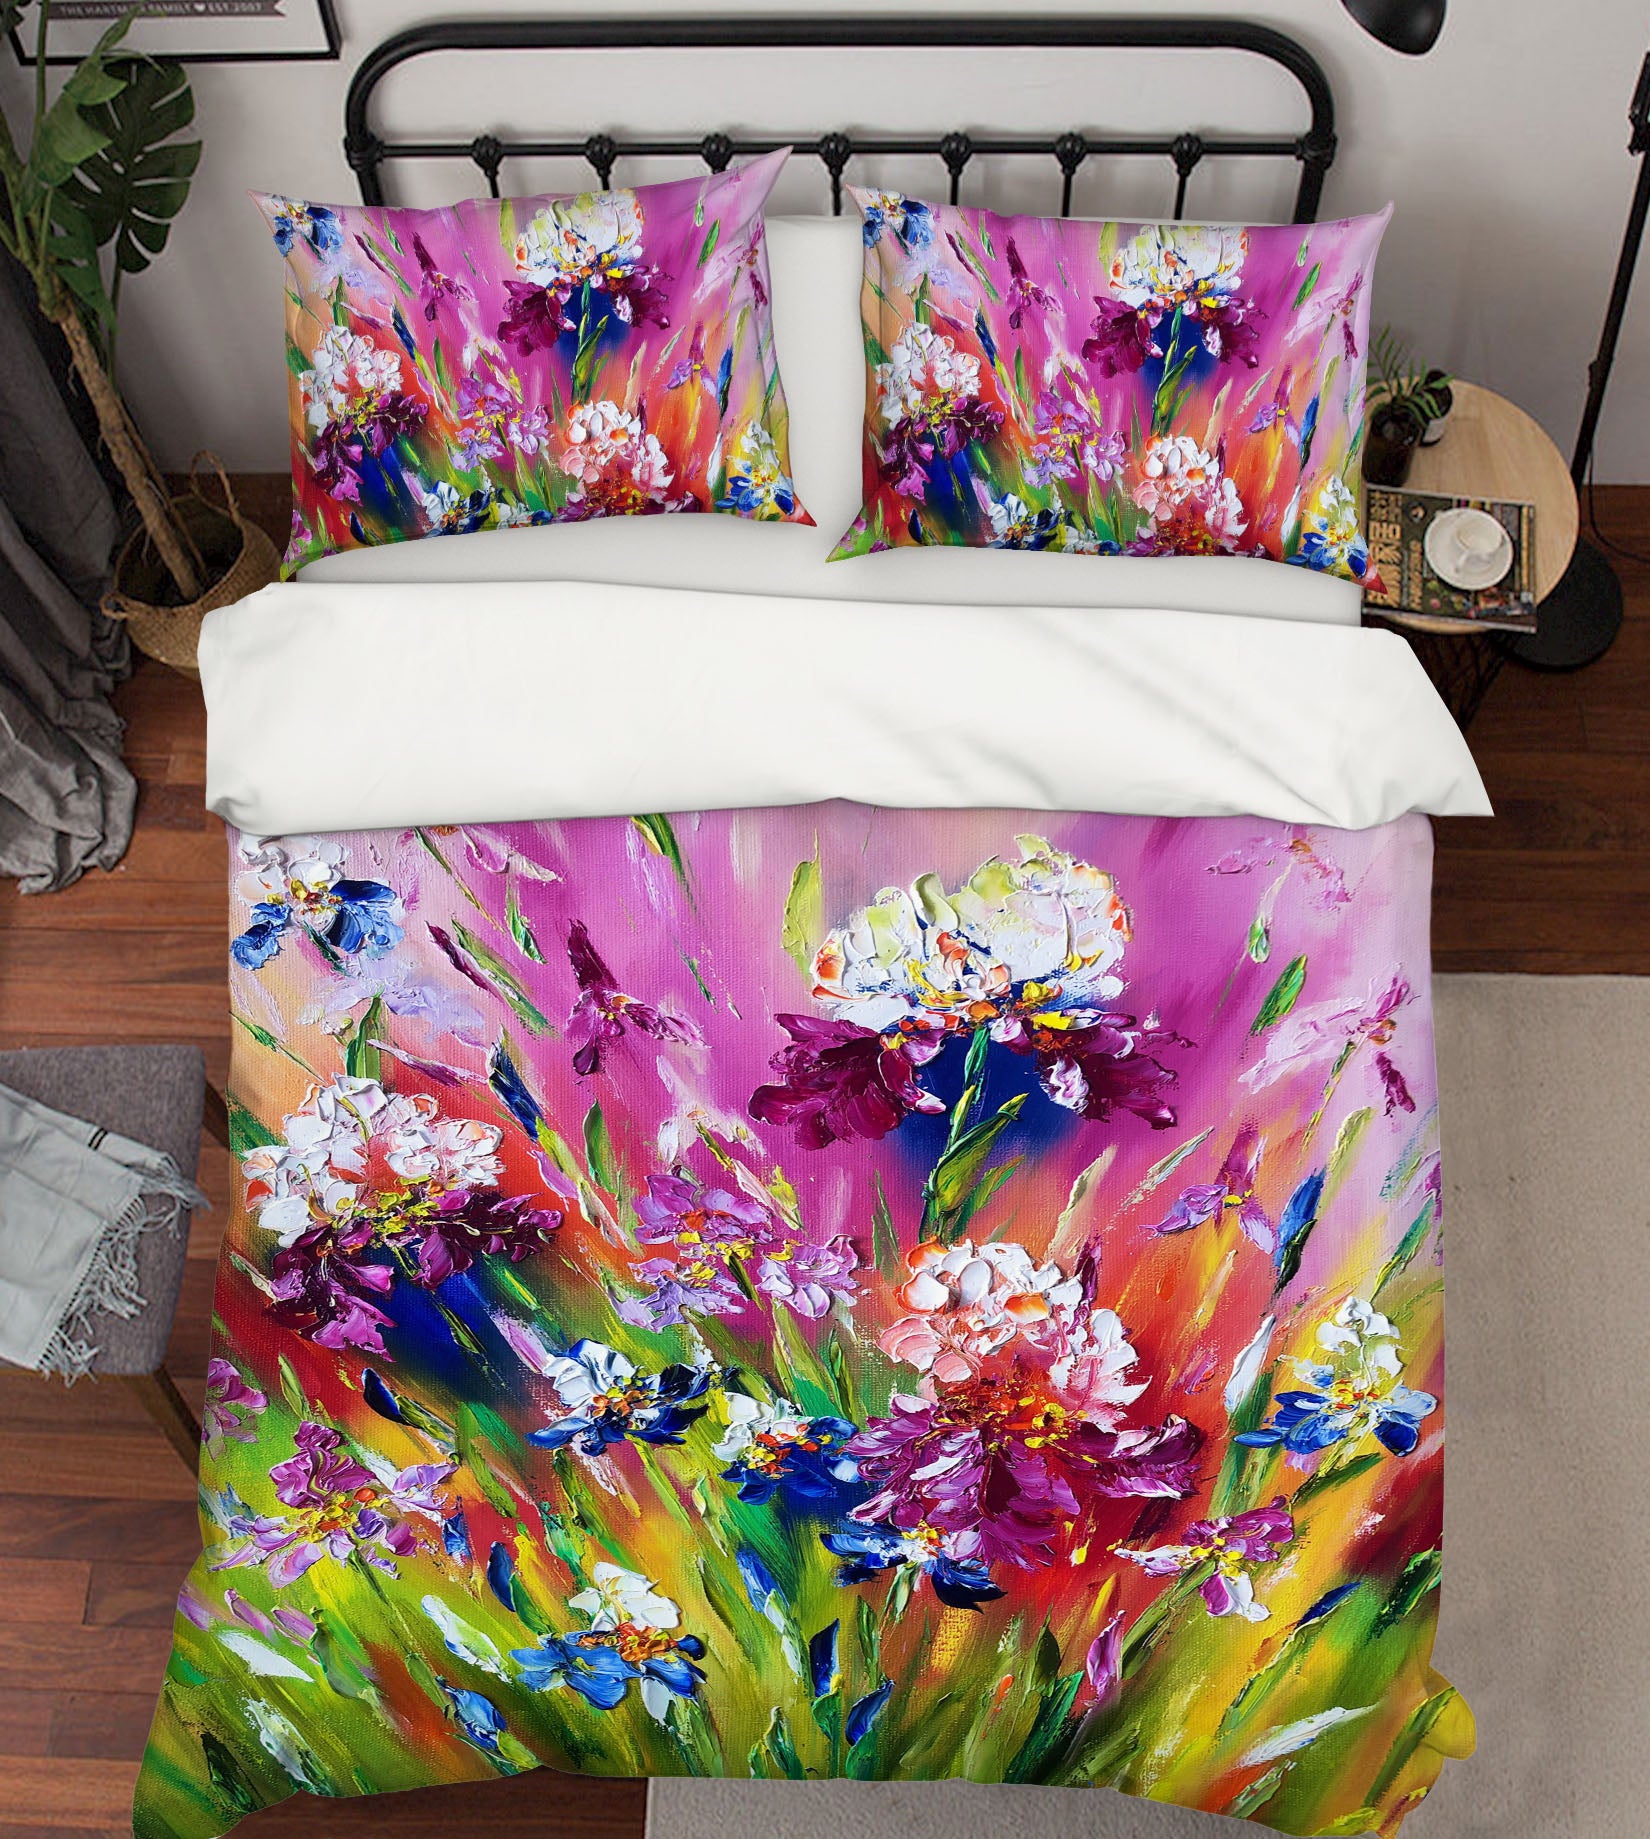 3D Flowers And Plants 605 Skromova Marina Bedding Bed Pillowcases Quilt